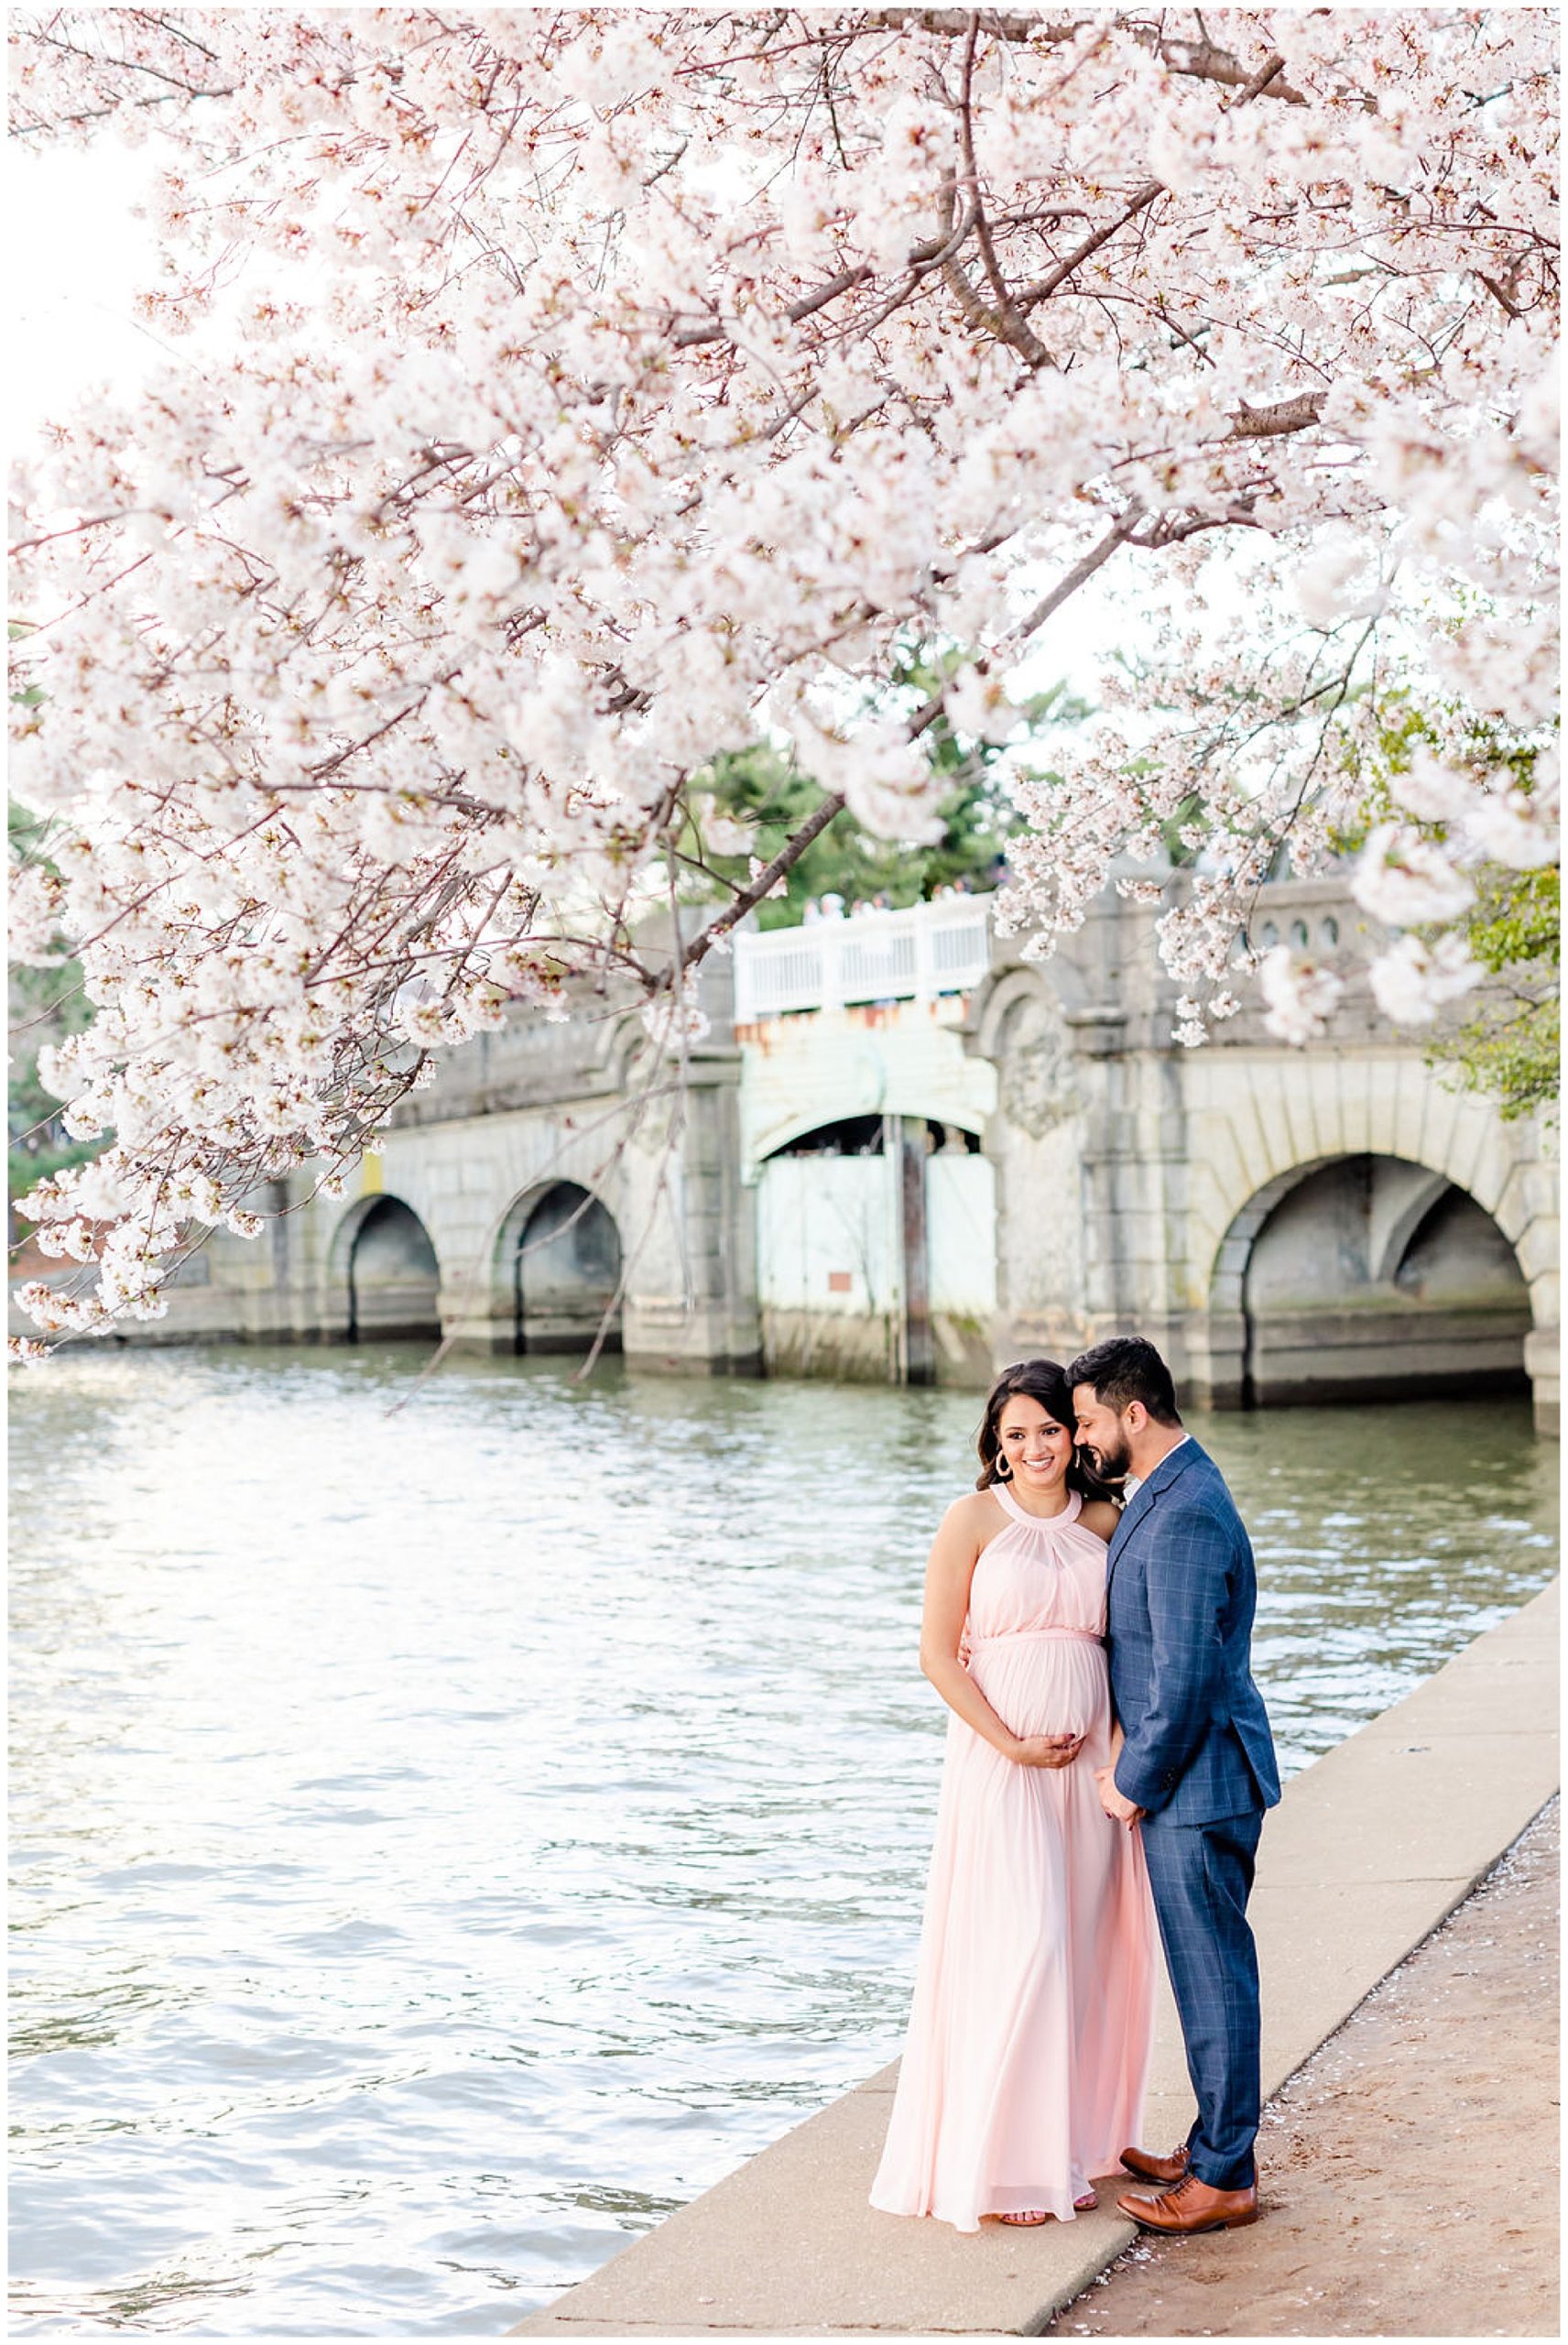 windy cherry blossoms maternity session, D.C. maternity photos, cherry blossoms maternity photos, D.C. portraits, D.C. cherry blossoms portraits, Tidal Basin Washington D.C., D.C. maternity photographer, D.C. photographer, spring portratis, Rachel E.H. Photography, couple in front of bridge, navy suit, woman holding baby bump